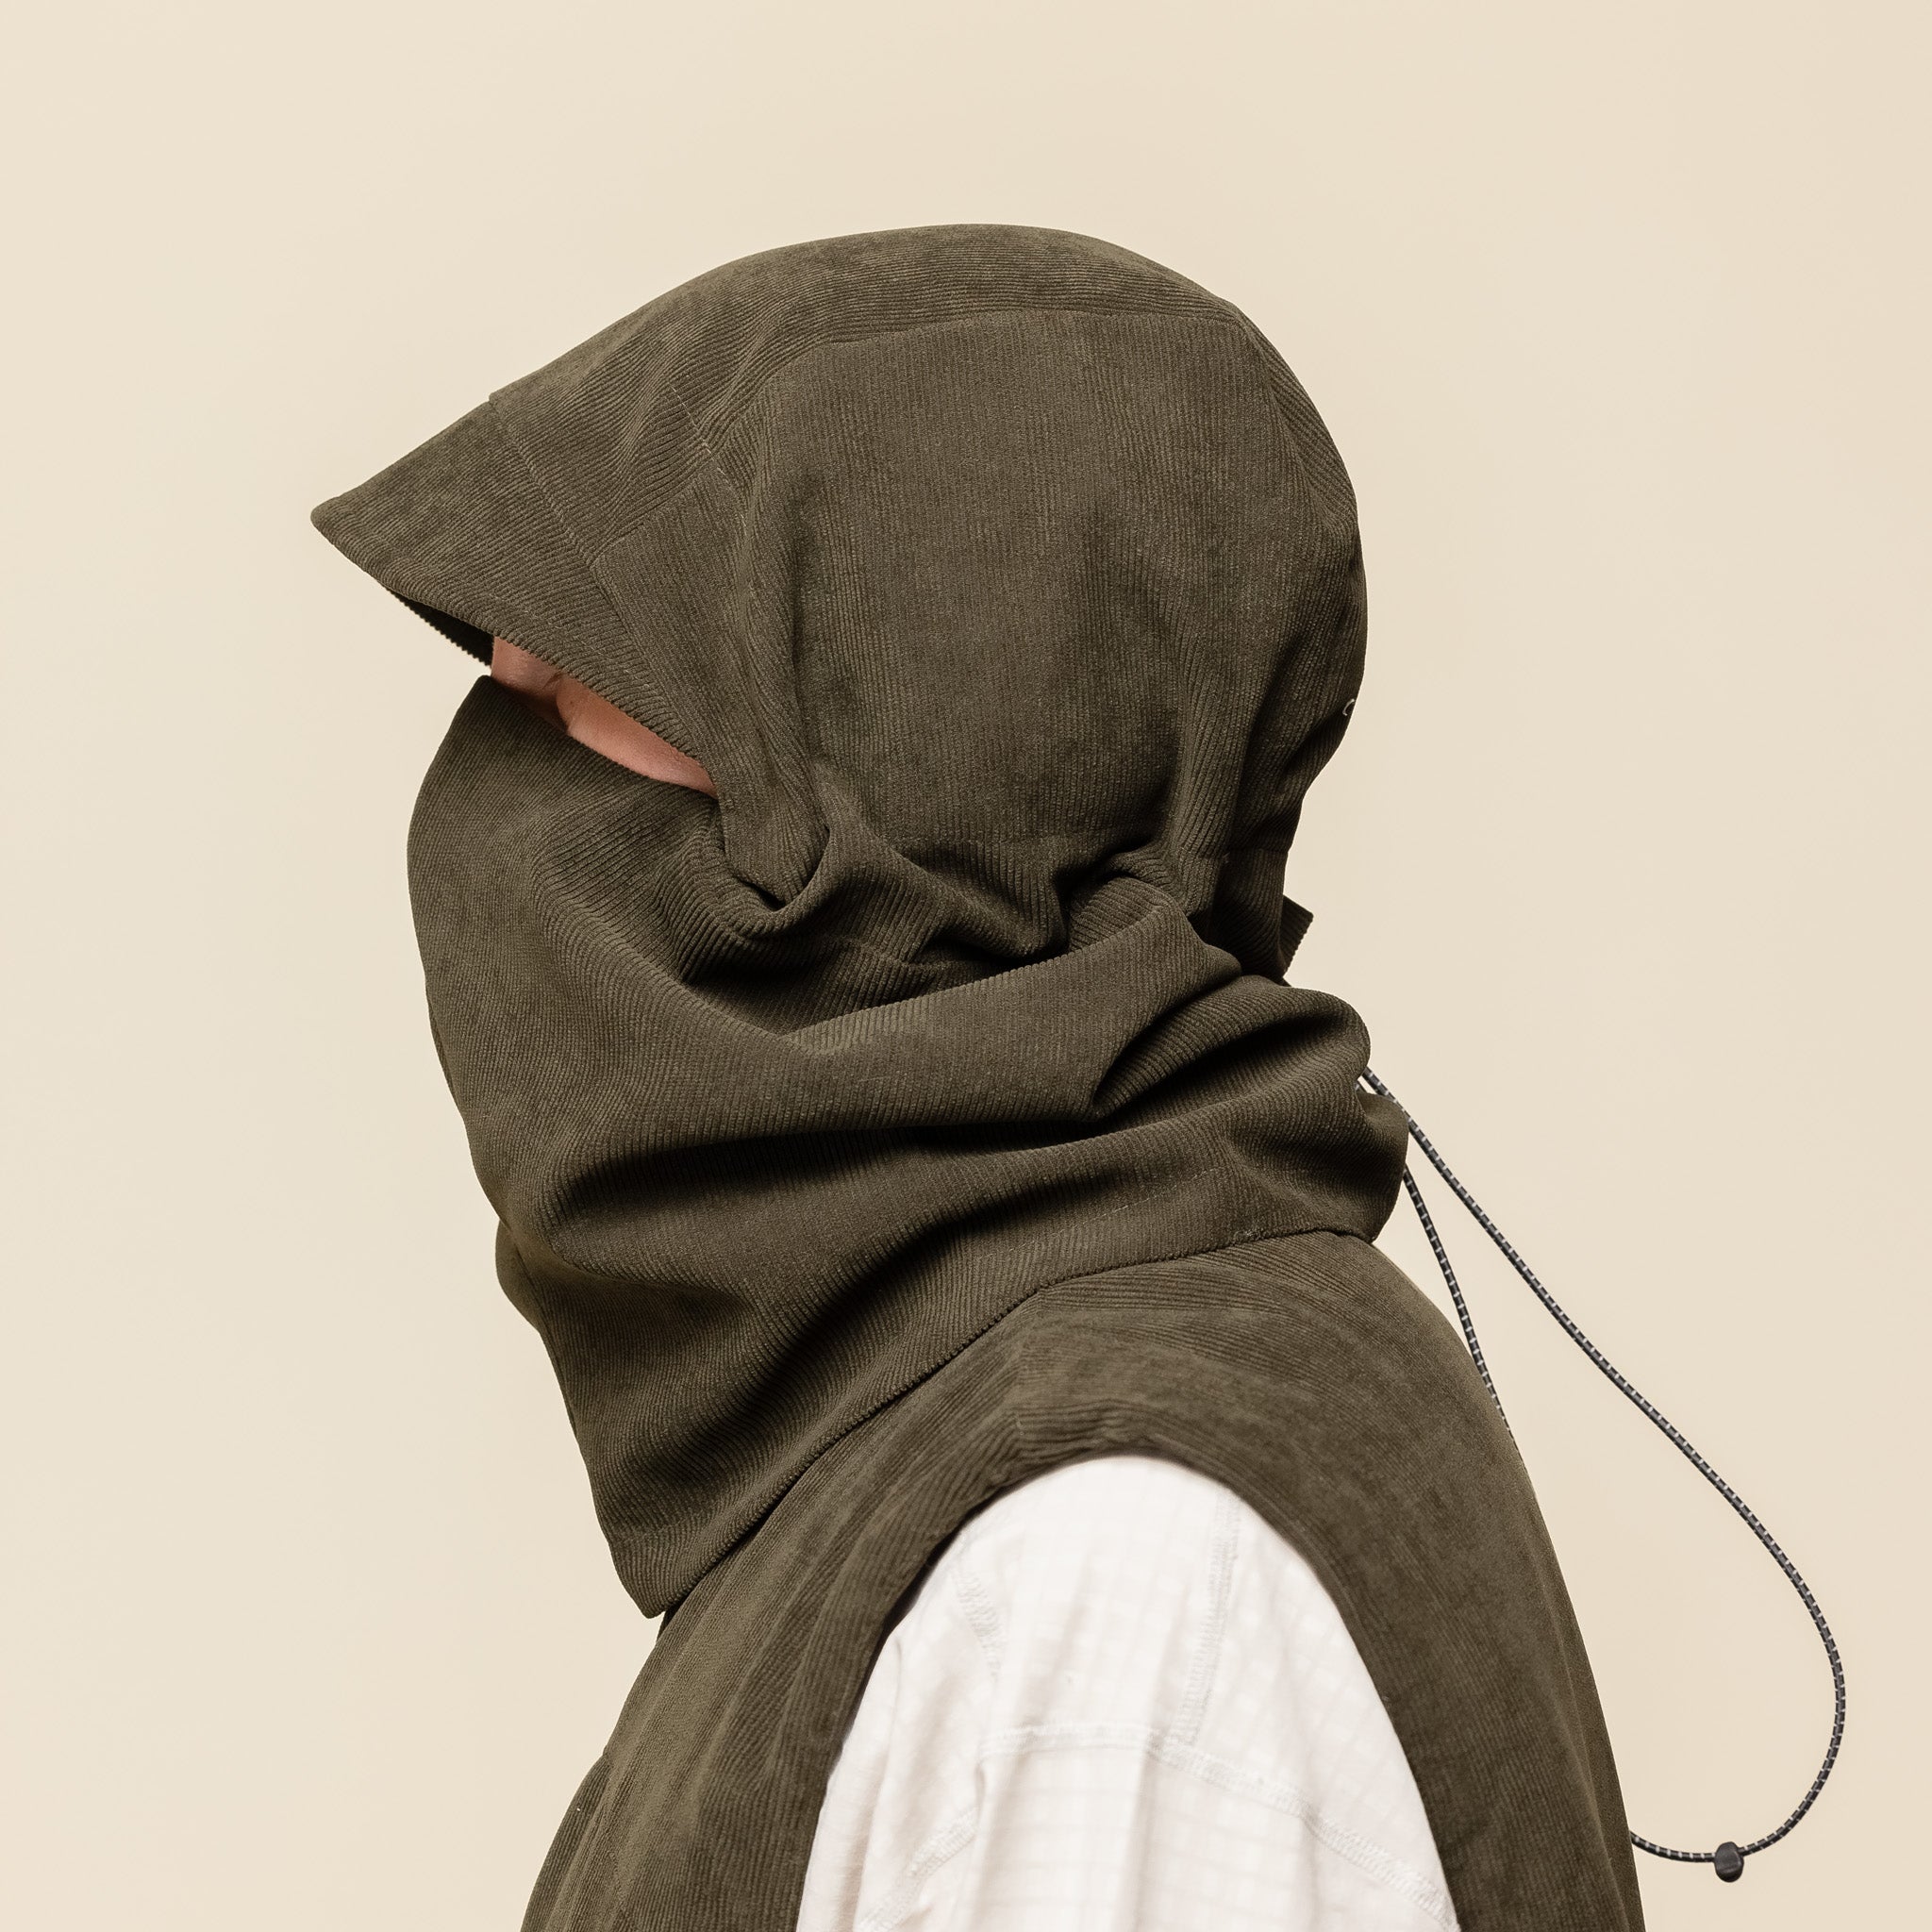 DEMARCOLAB - Active Cord Hooded Warmer - Olive "demarcolab" "demarcolab stockists" "demarcolab taiwan" "demarco lab"